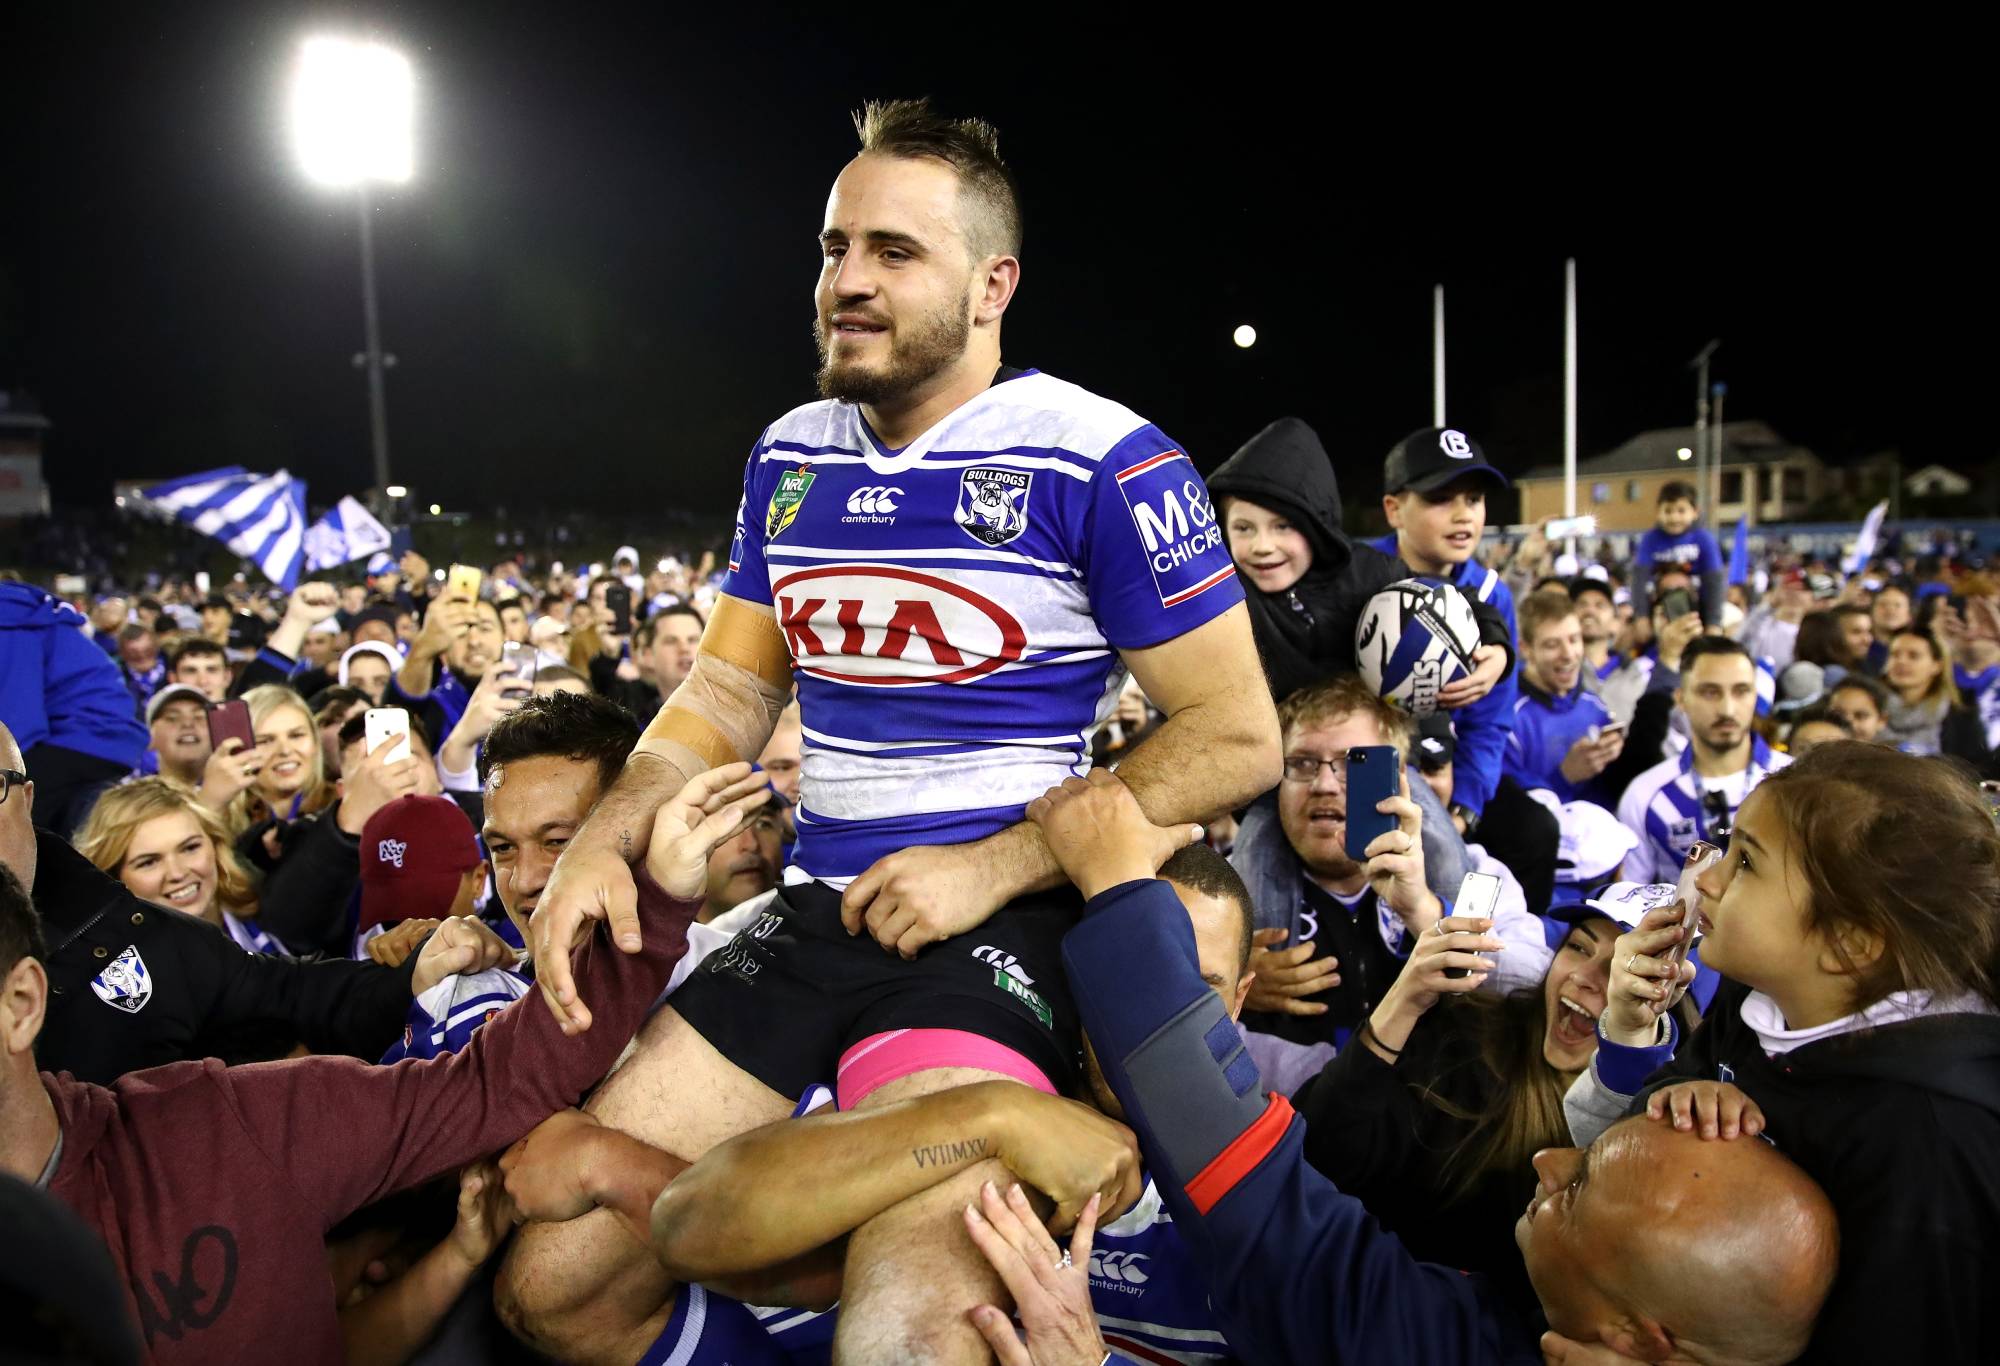 Josh Reynolds of the Bulldogs is chaird off the field after winning the round 18 NRL match between the Canterbury Bulldogs and the Newcastle Knights at Belmore Sports Ground on July 9, 2017 in Sydney, Australia